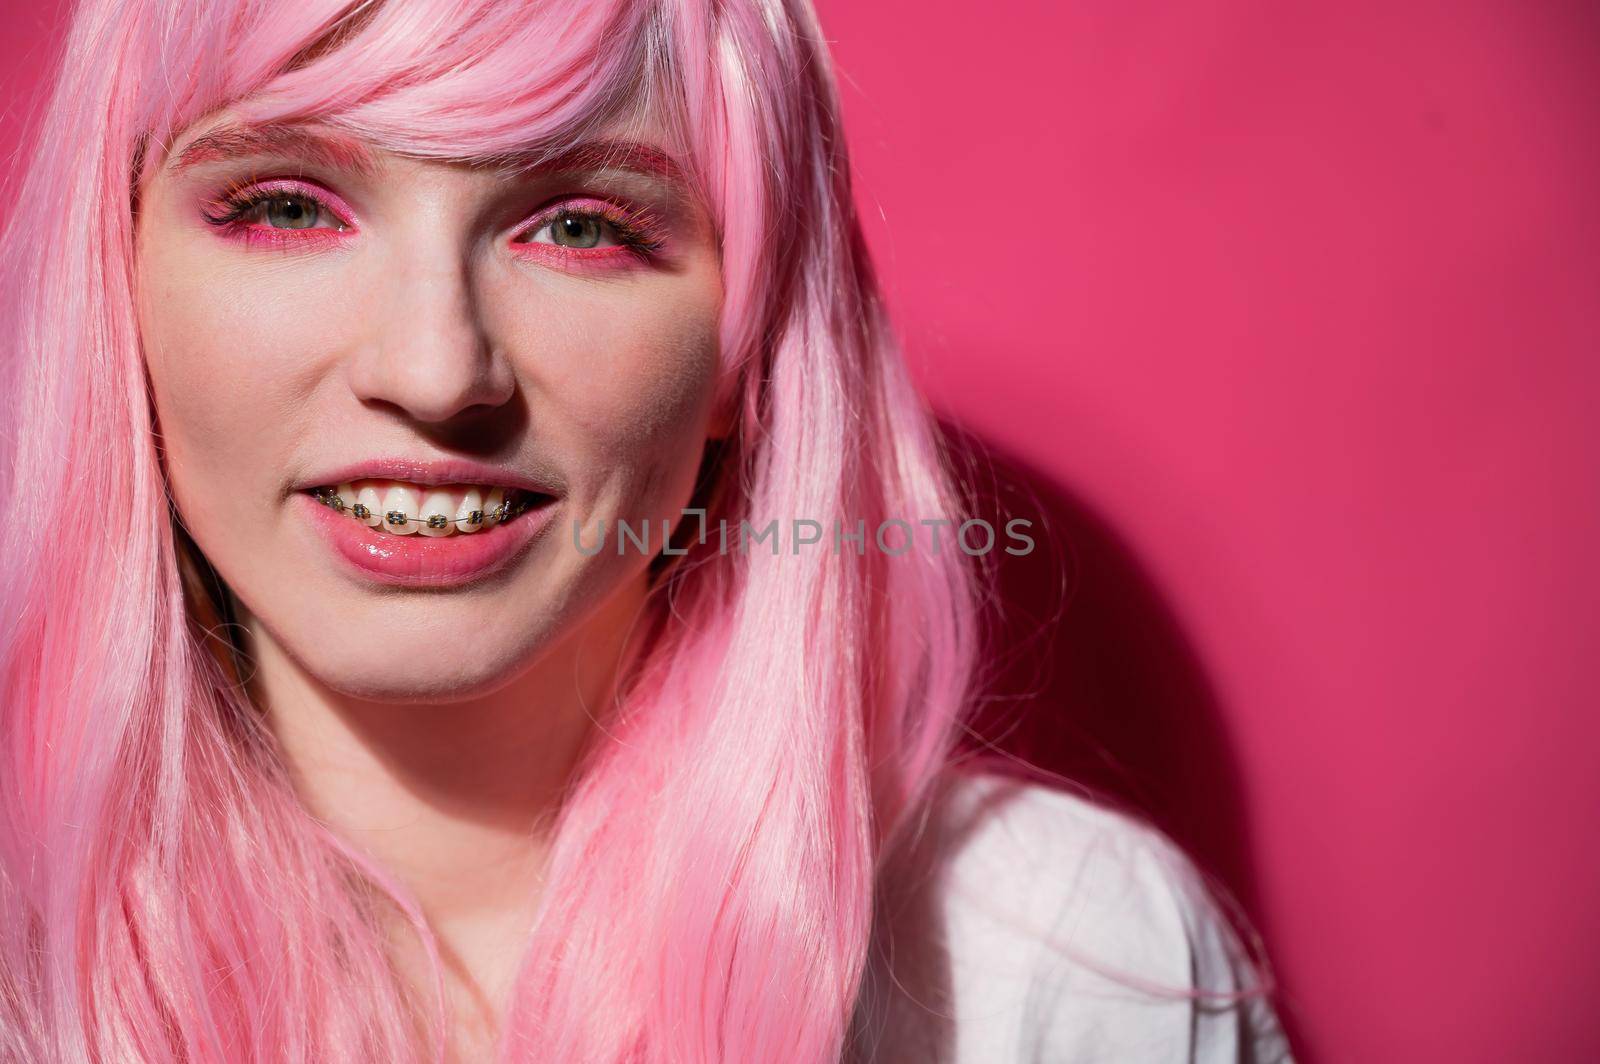 Close-up portrait of a young woman with braces in a pink wig on a pink background